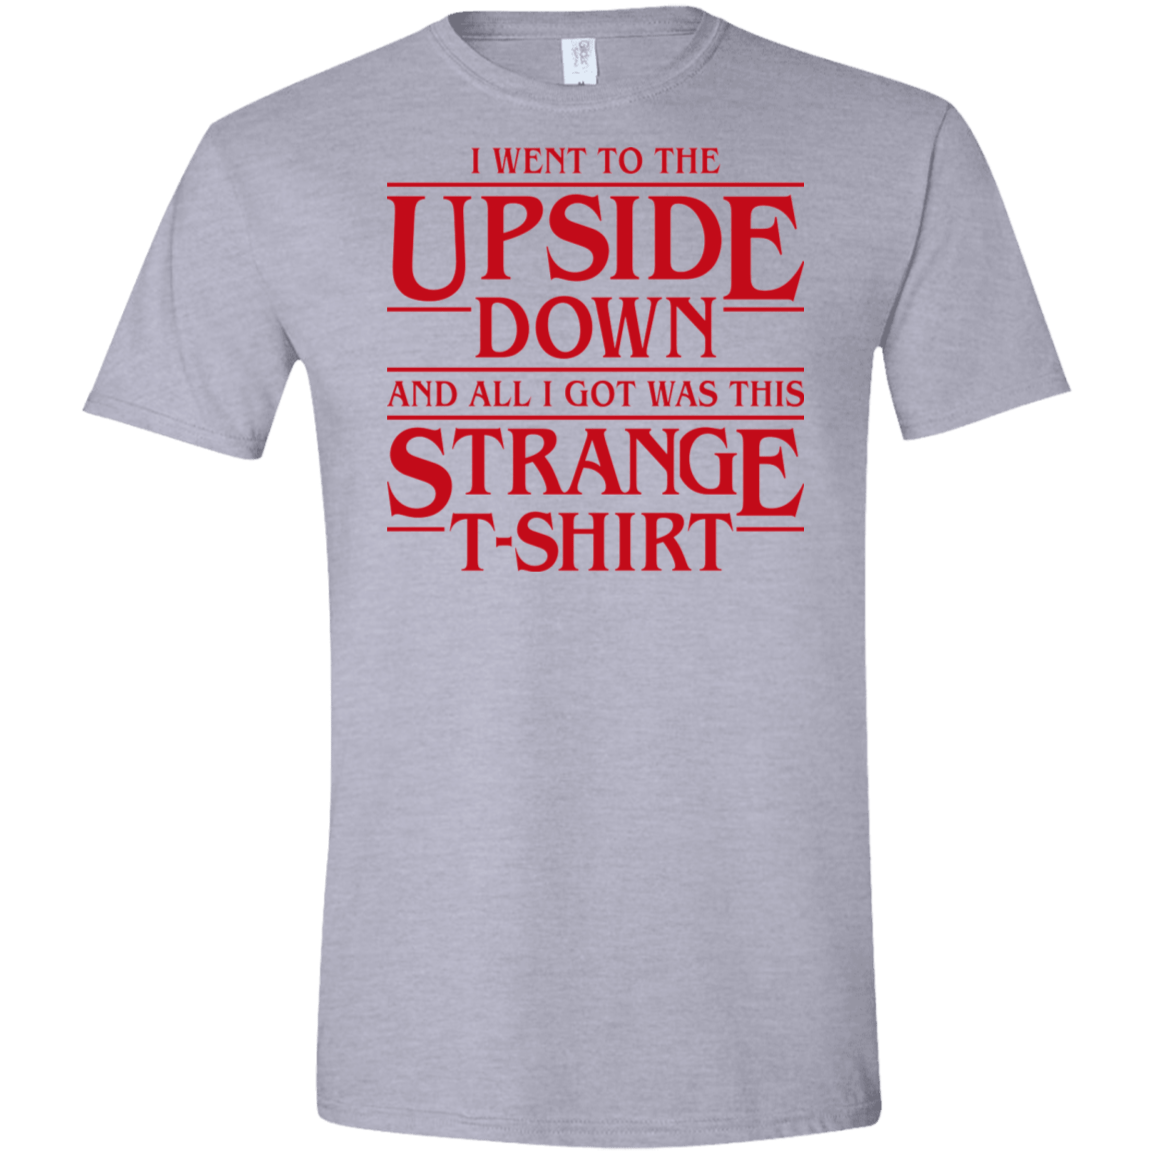 T-Shirts Sport Grey / X-Small I Went to the Upside Down Men's Semi-Fitted Softstyle